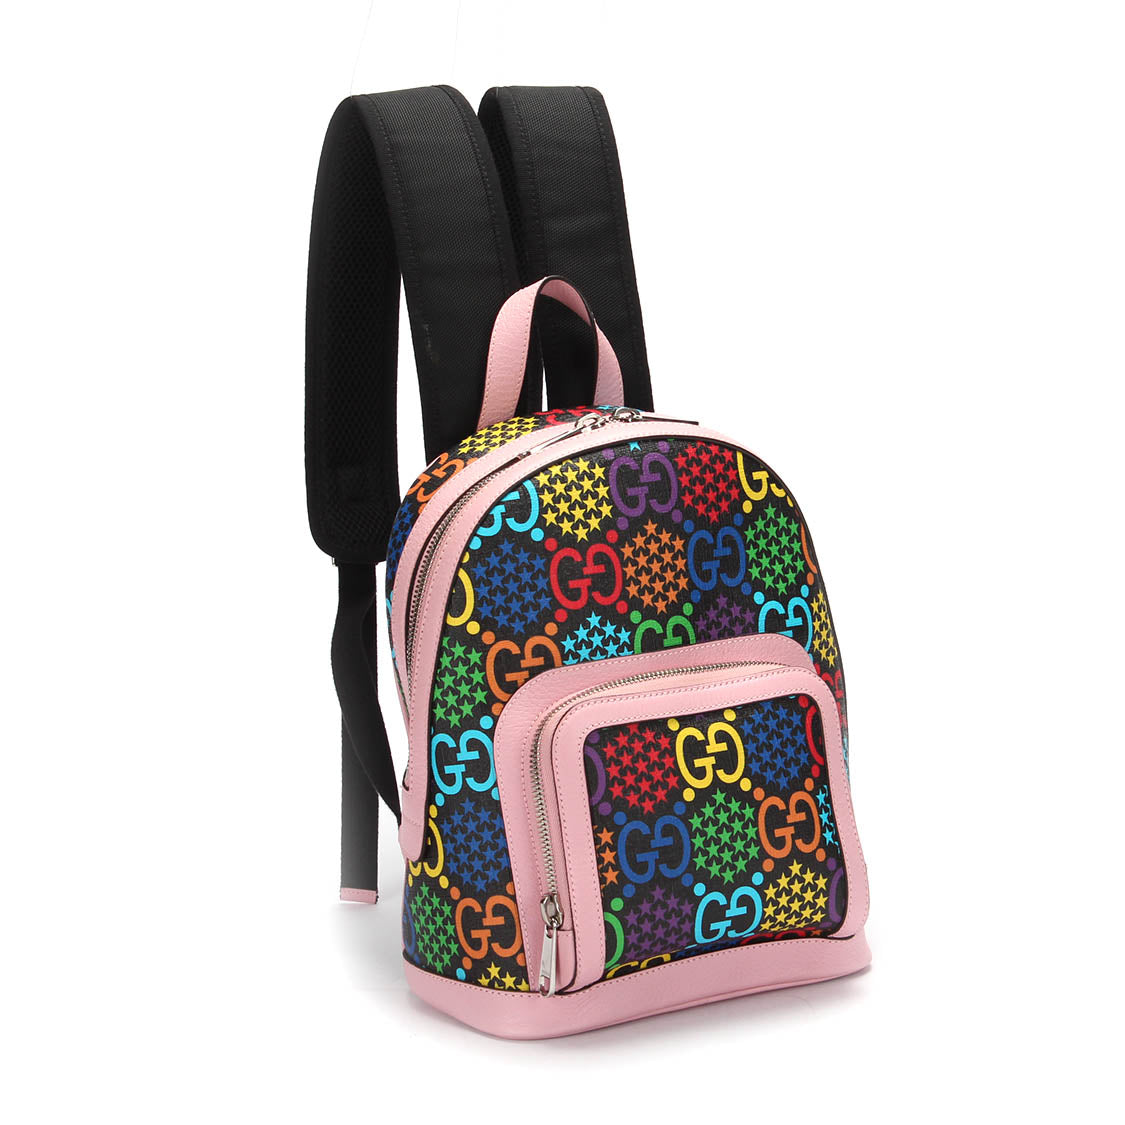 GG Psychedelic Backpack